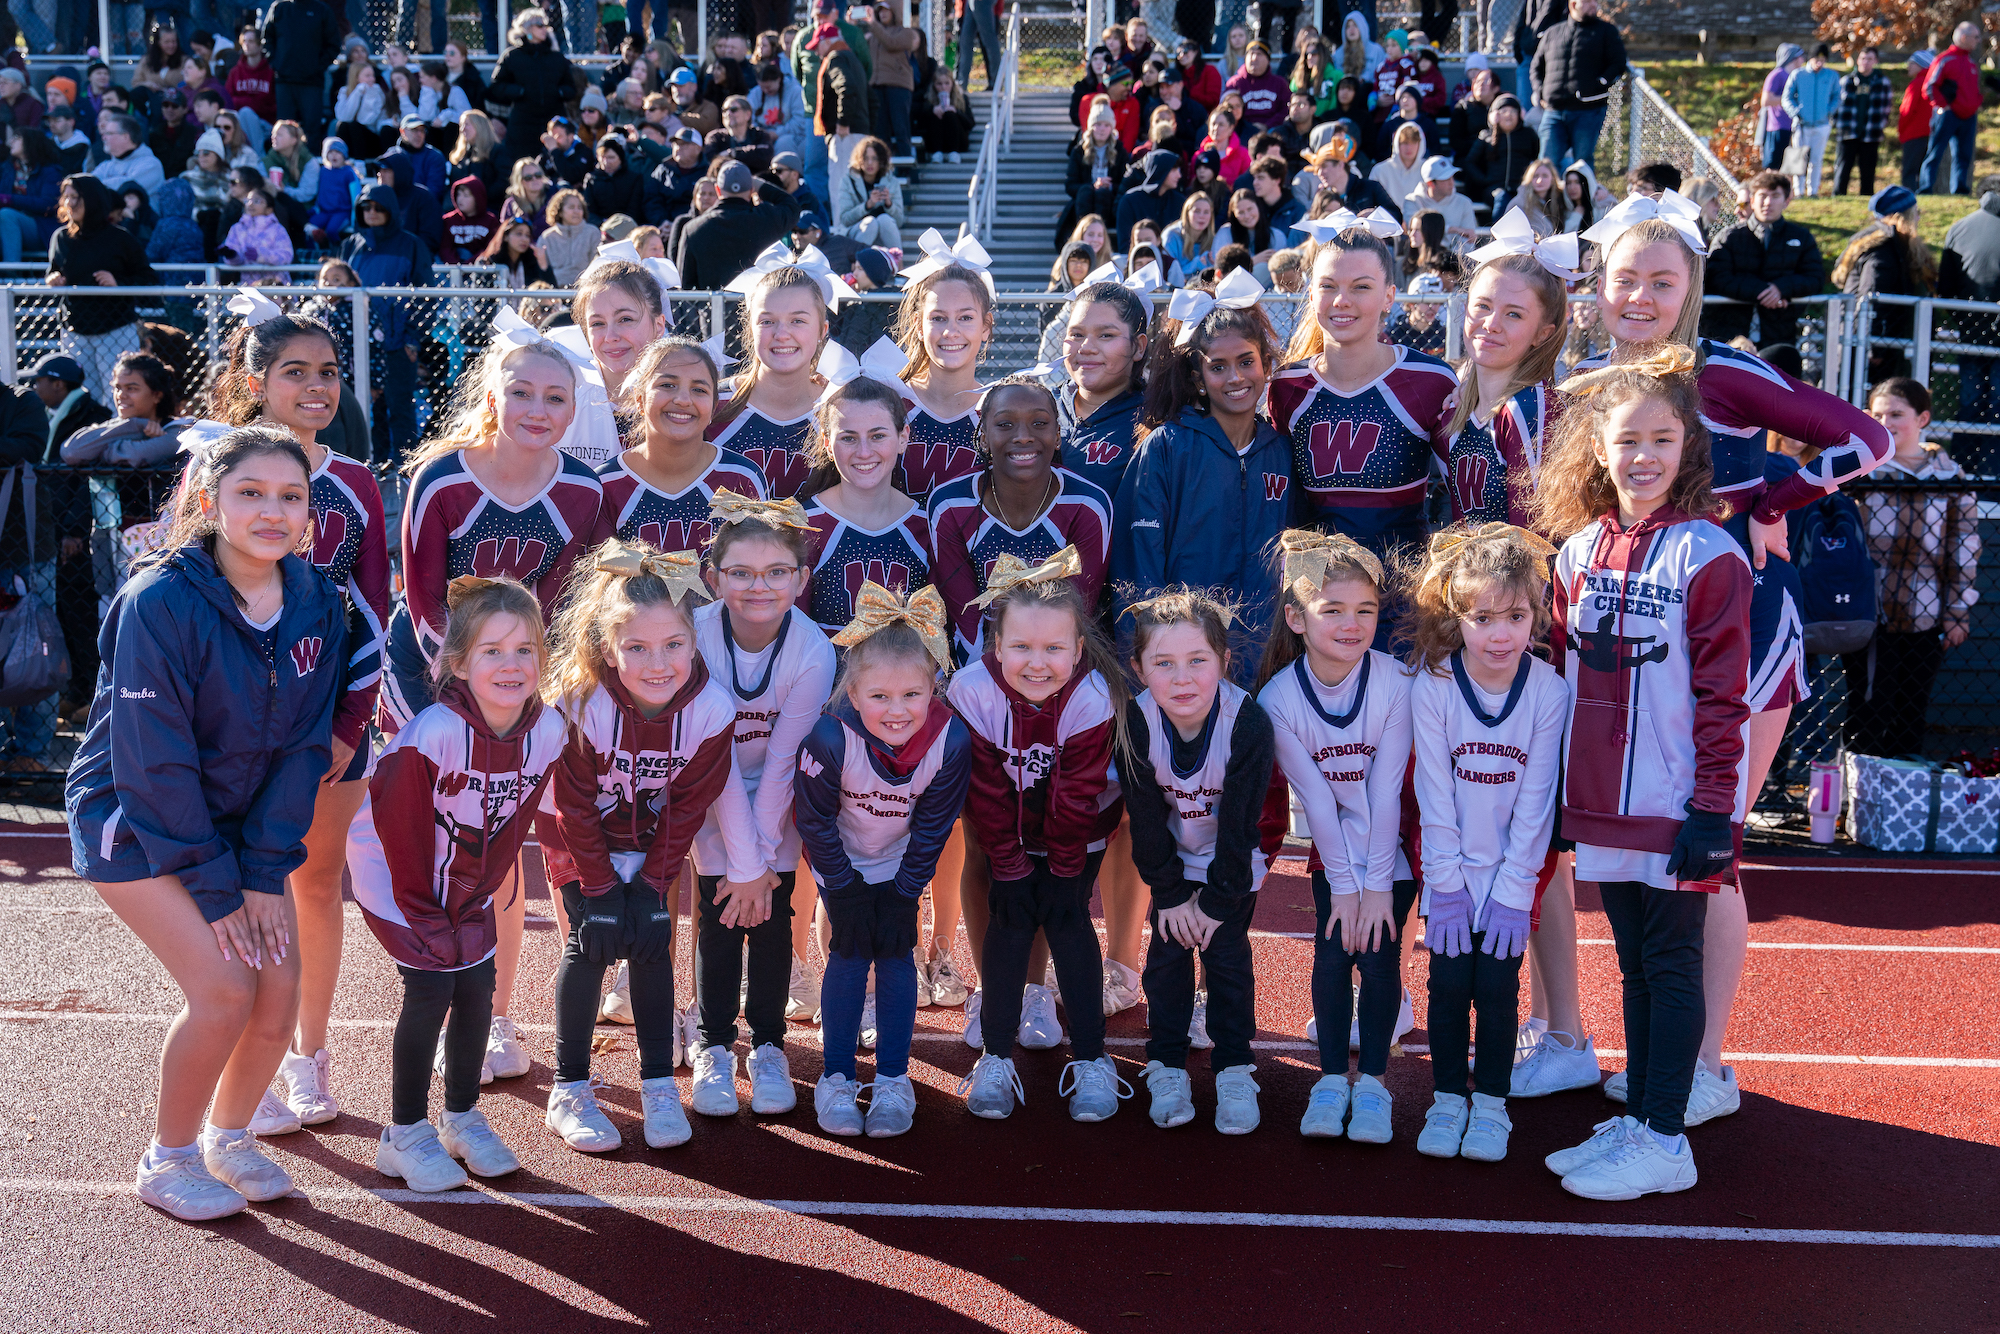 Westborough youth cheerleaders return to the sidelines